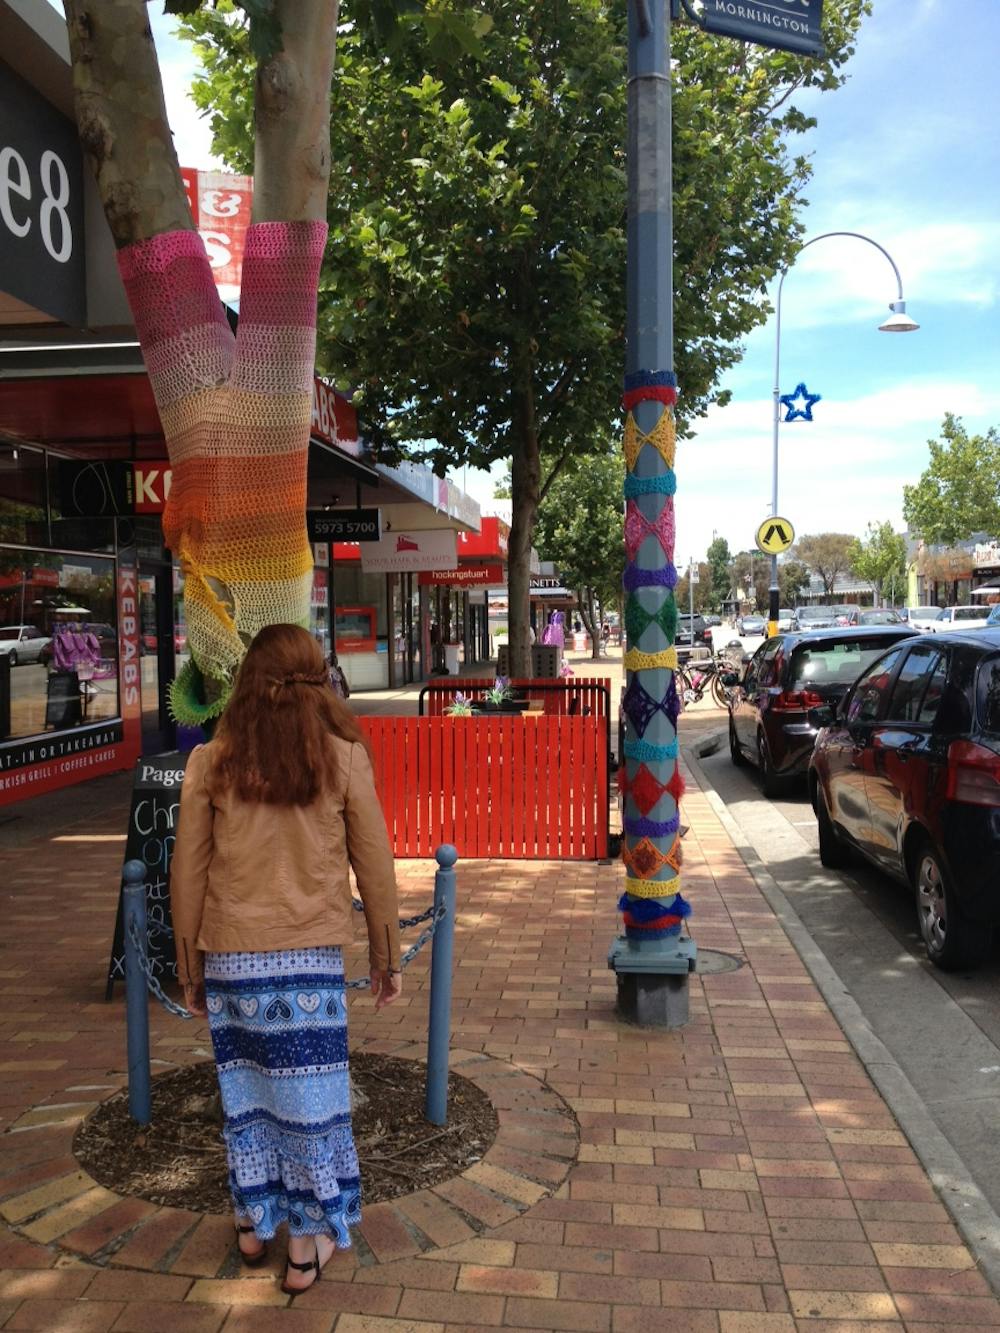 Knit one, purl one: the mysteries of yarn bombing unravelled